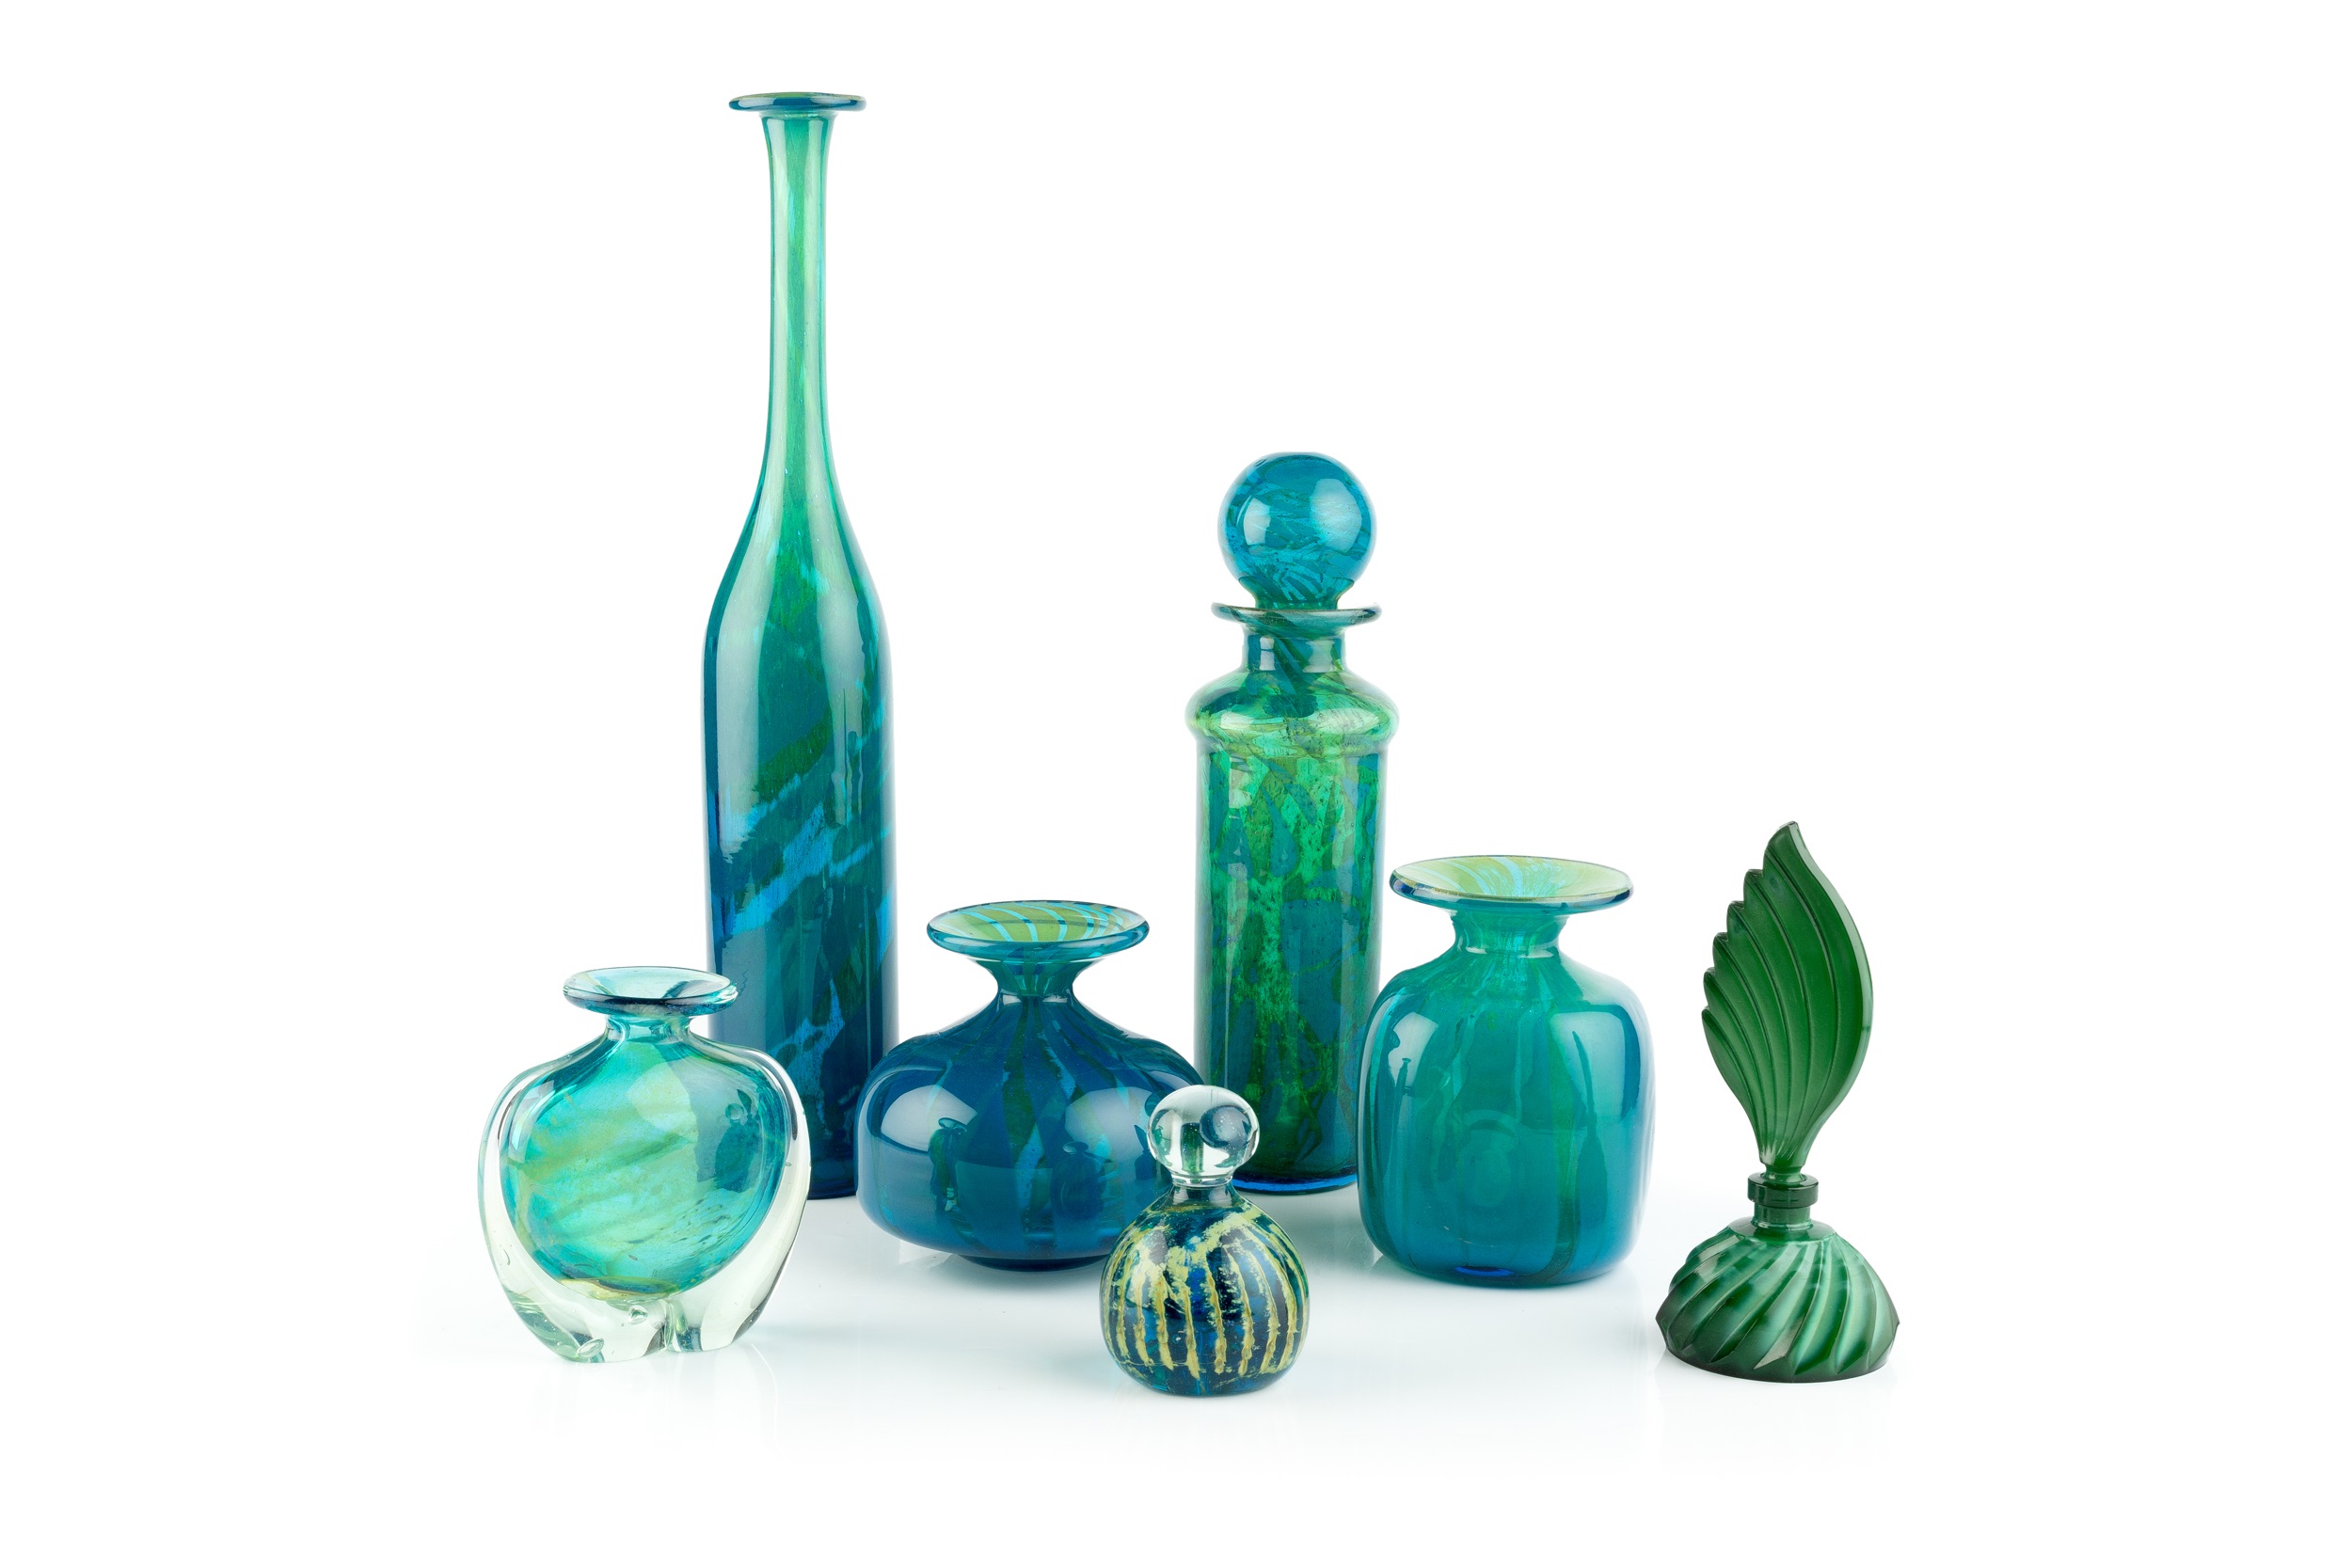 Mdina Glass Six pieces each market including a large bottle, 42cm high; together with an Art Deco